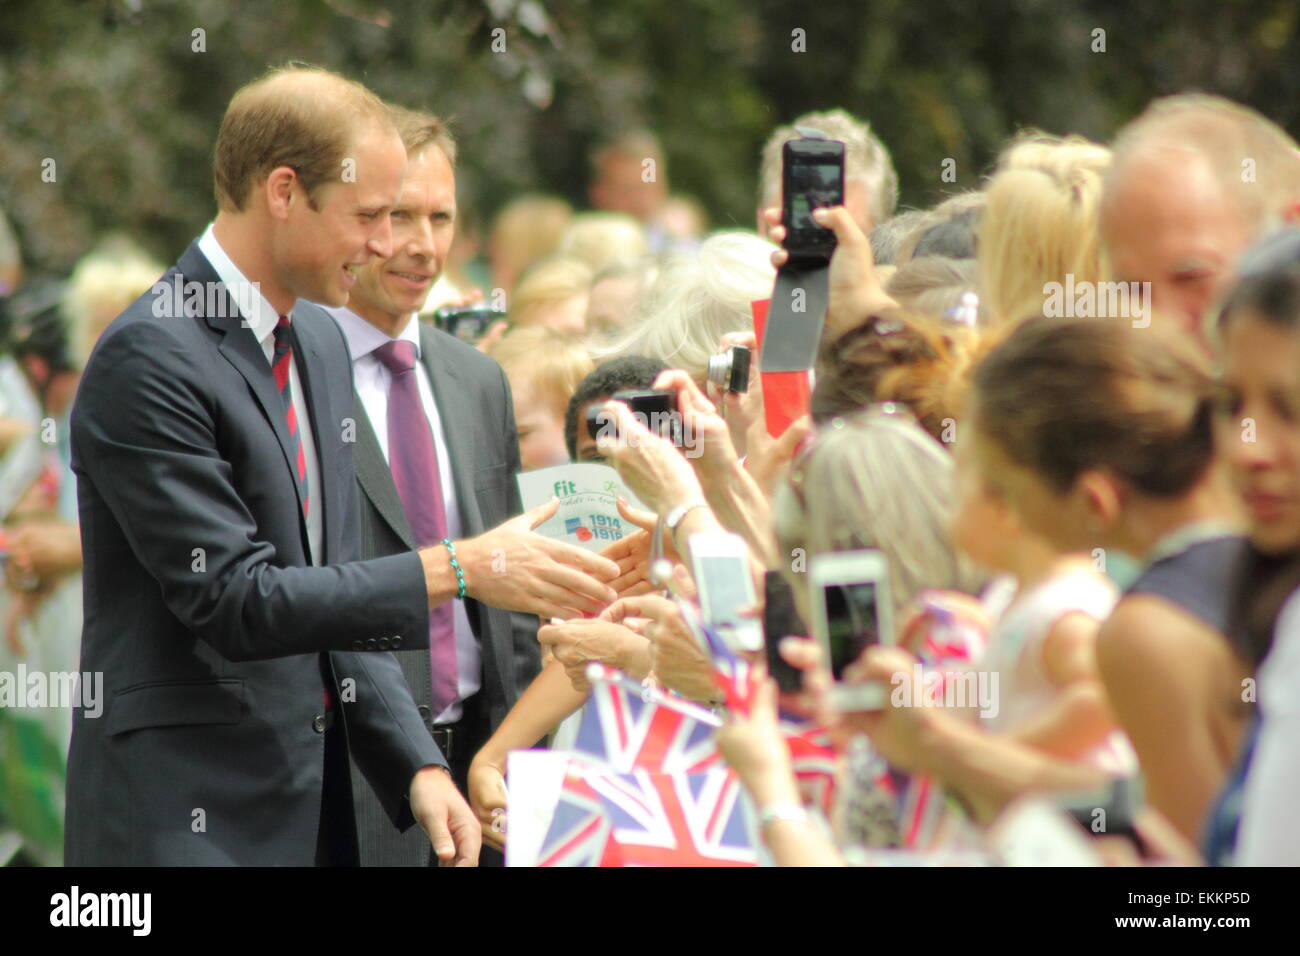 Prince William is photographed by well-wishers at the War Memorial Park, Coventry, UK - July 2014. Stock Photo